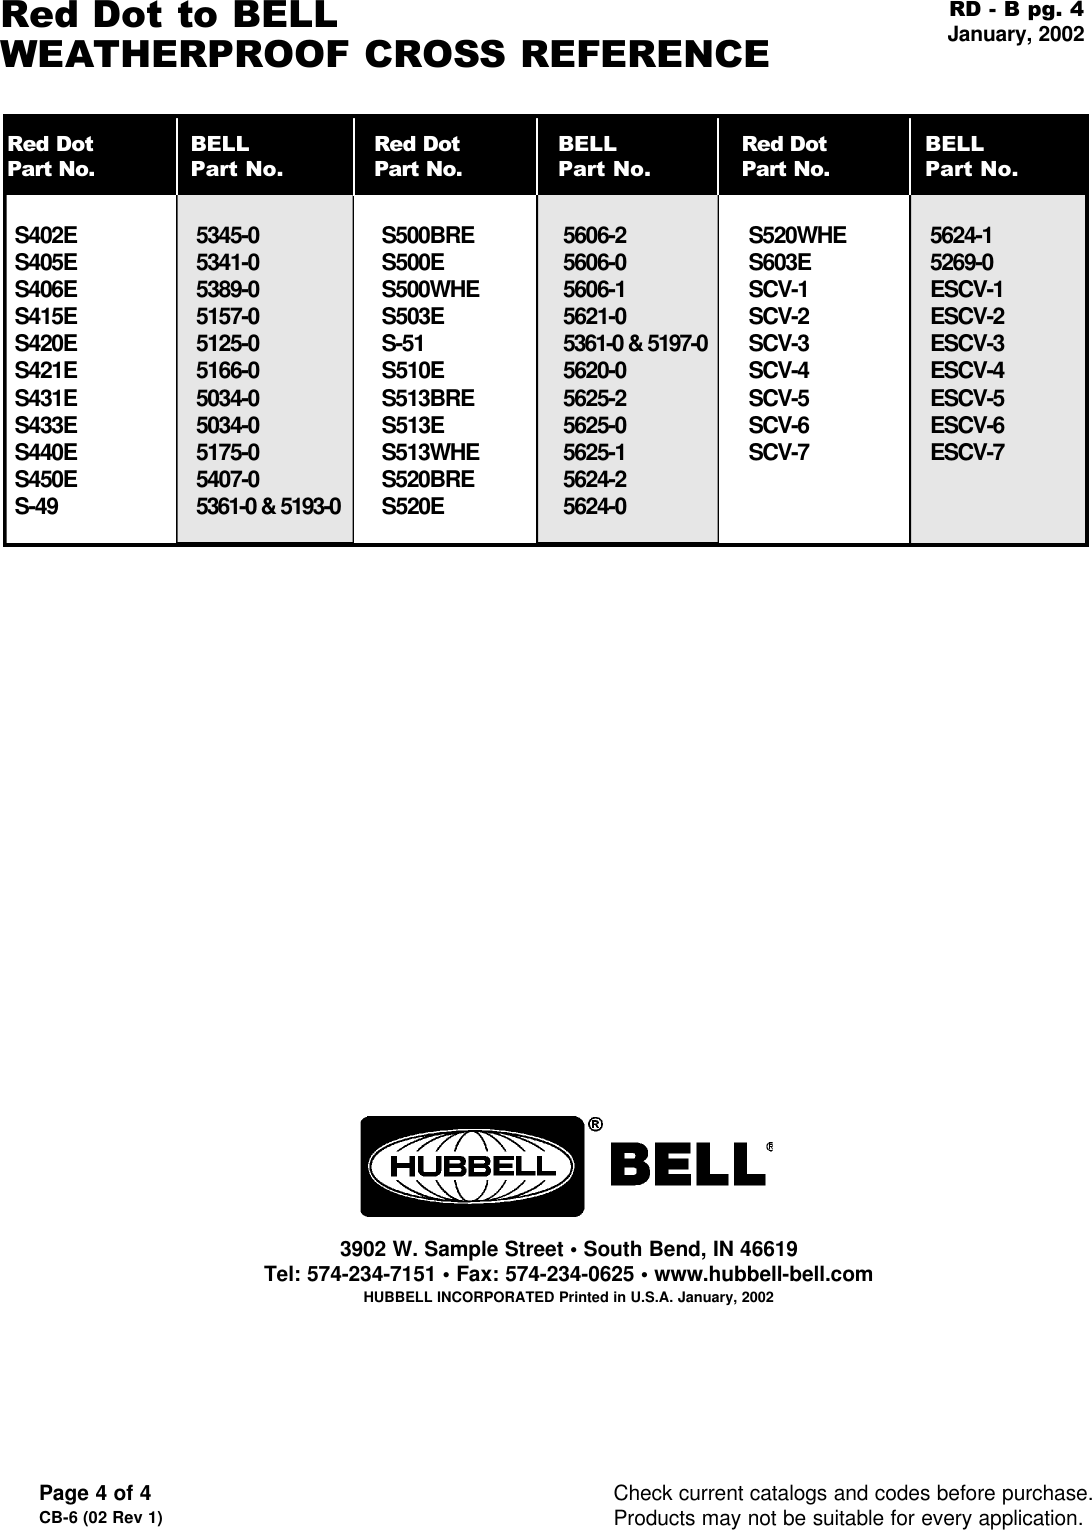 Page 4 of 4 - Red Dot-Bell  Brochure